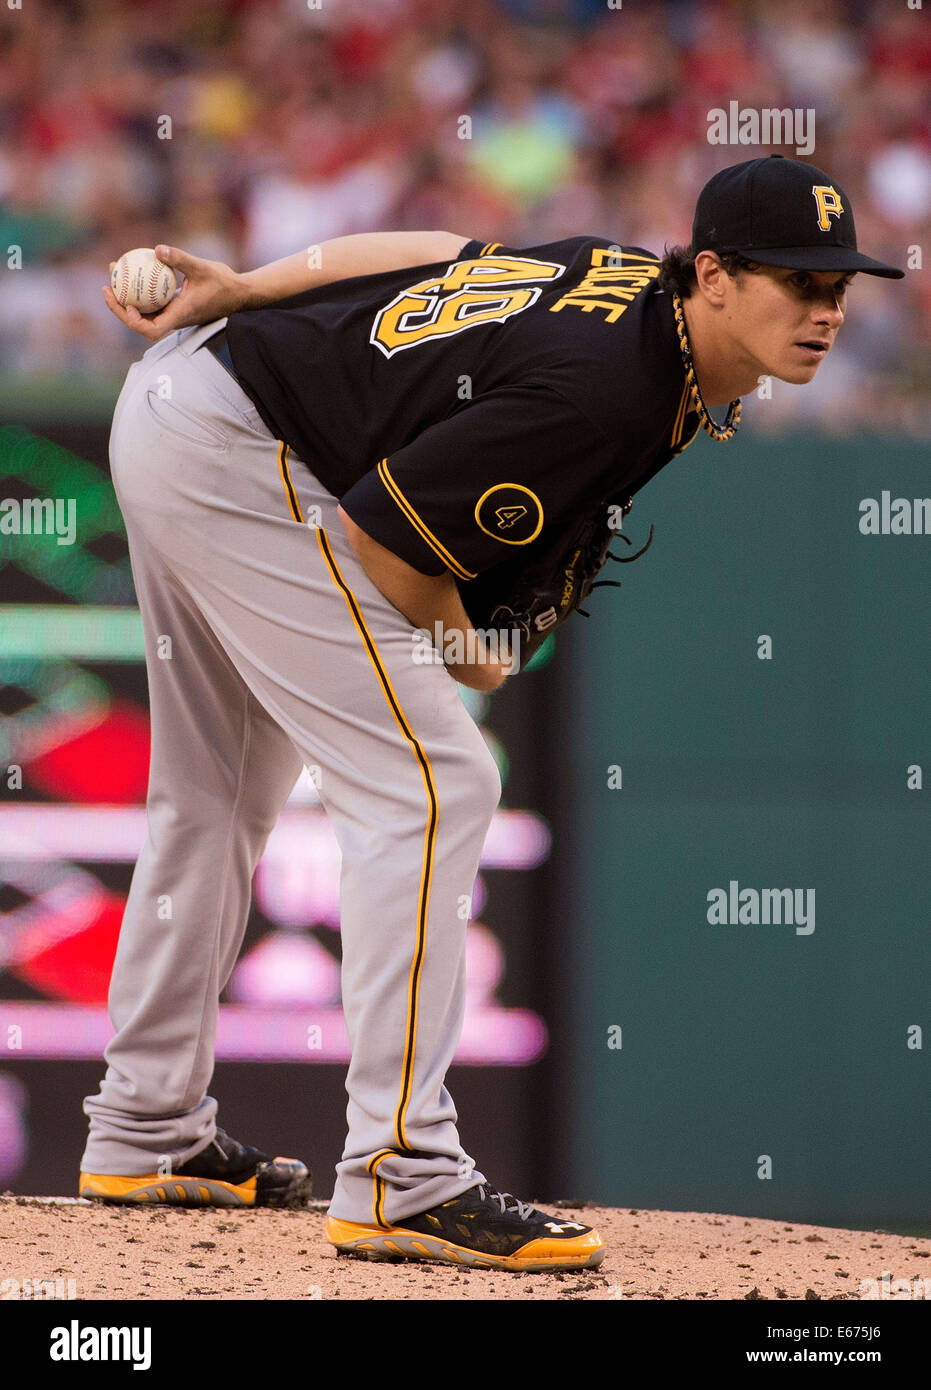 Washington, DC, USA. 16th Aug, 2014. Pittsburgh Pirates starting pitcher Jeff Locke (49) delivers a pitch against the Washington Nationals during the first inning of their game at Nationals Park in Washington, D.C, Saturday, August 16, 2014. Credit:  Harry E. Walker/ZUMA Wire/Alamy Live News Stock Photo